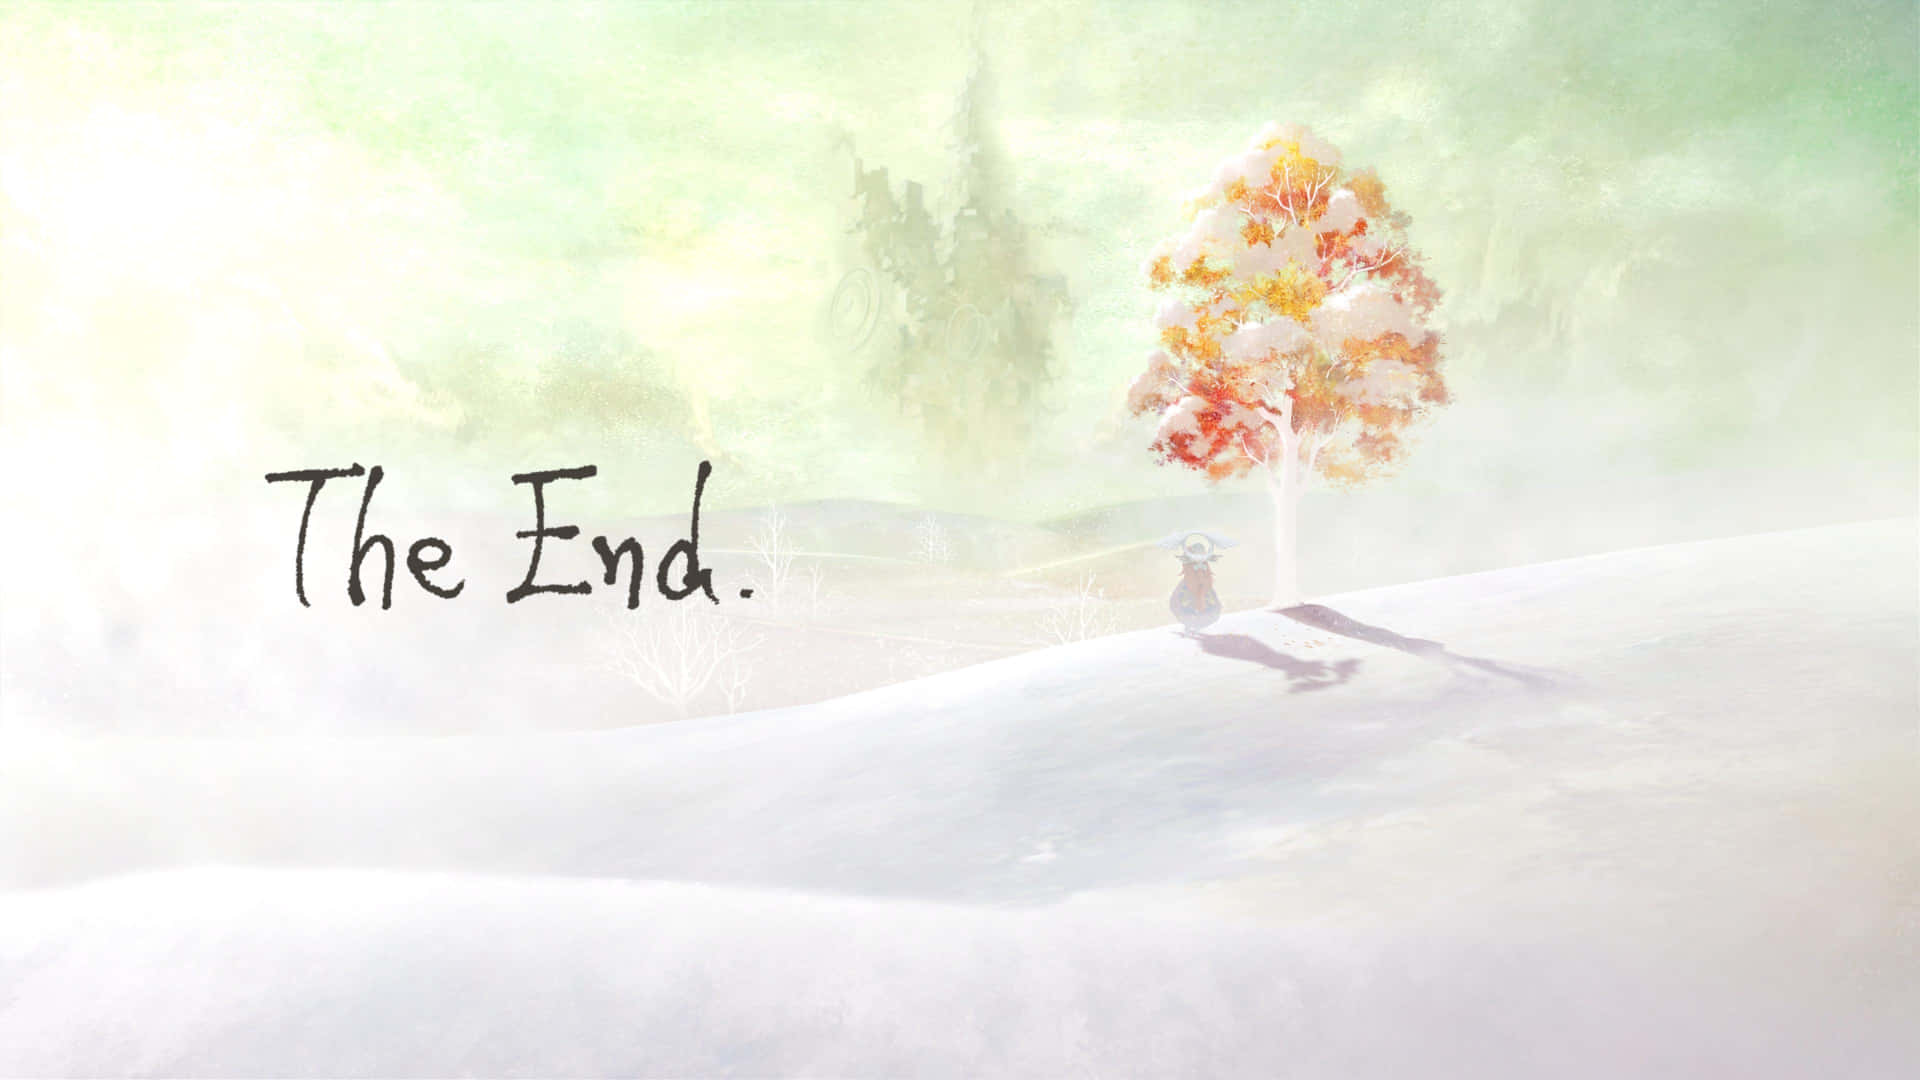 The End - Wallpaper Background